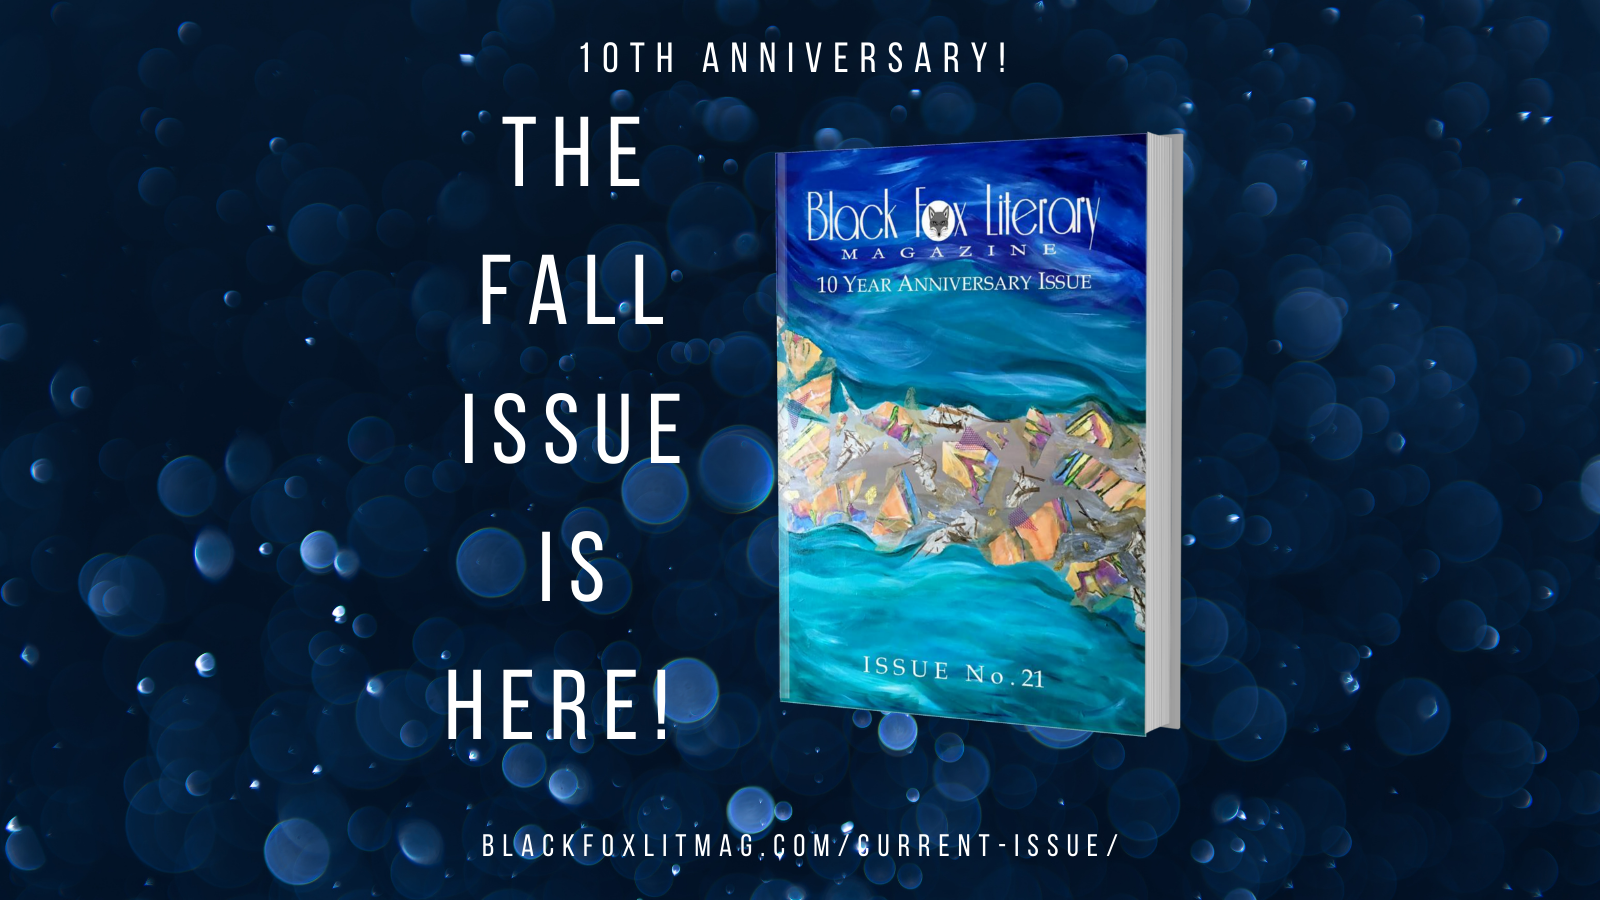 The Anniversary Issue (#21) is Here!